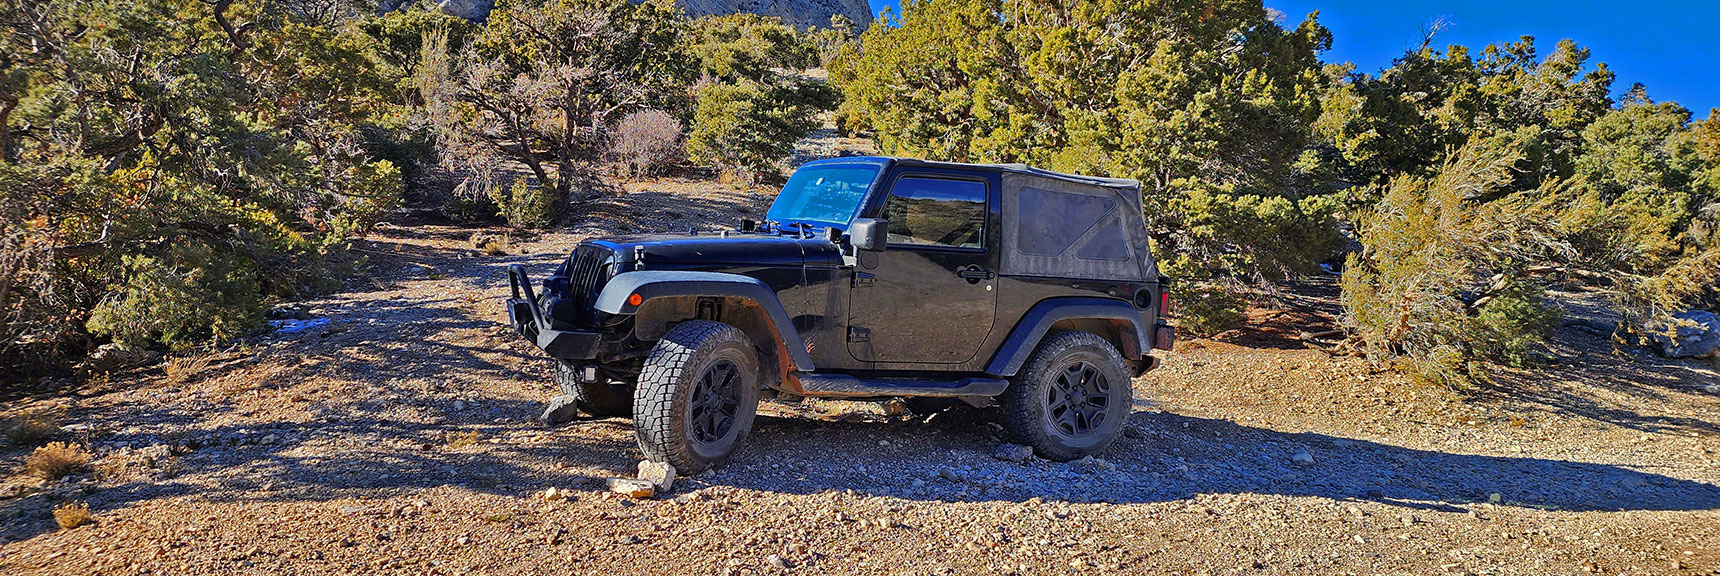 Rocky Gap Road is a Challenge for the Toughest Vehicles. On Foot, I Beat This Jeep to the Summit (4-5 Miles)! | Mid Upper Crest Ridgeline | Rainbow Mountain Wilderness, Nevada